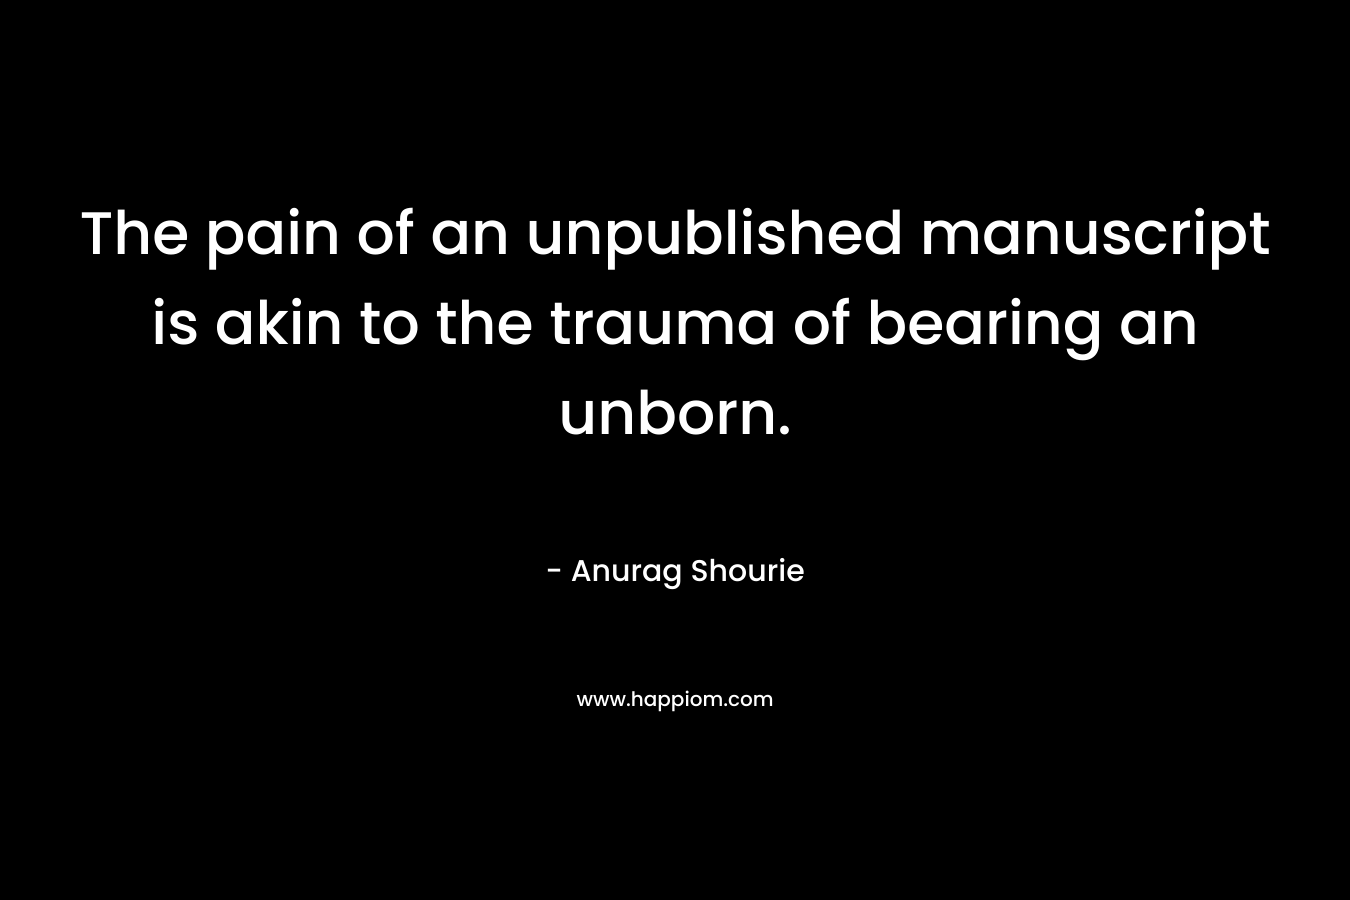 The pain of an unpublished manuscript is akin to the trauma of bearing an unborn.